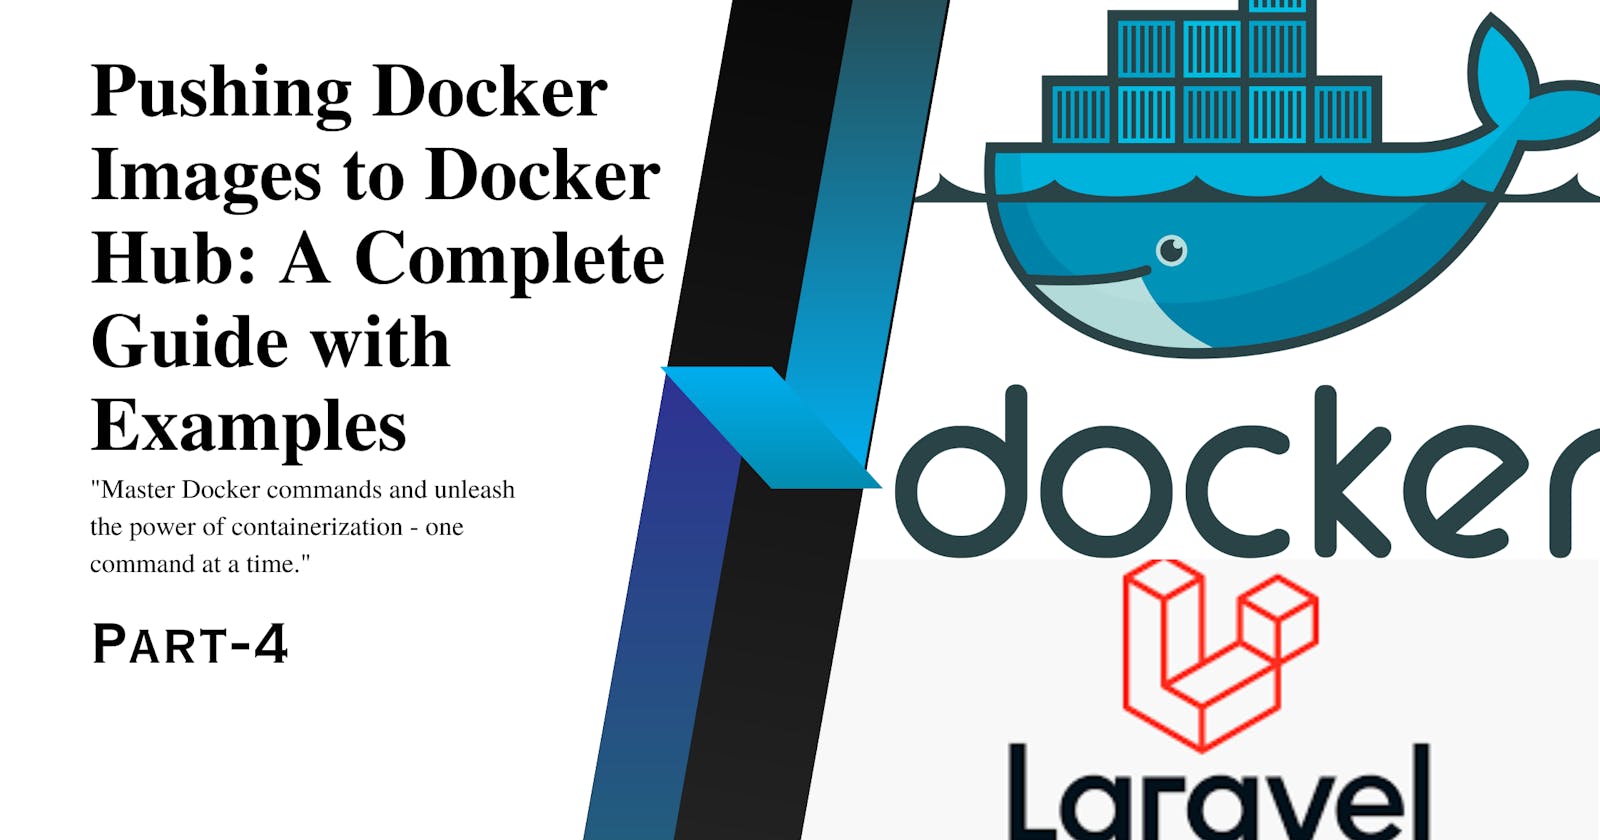 Pushing Docker Images to Docker Hub: A Complete Guide with Examples